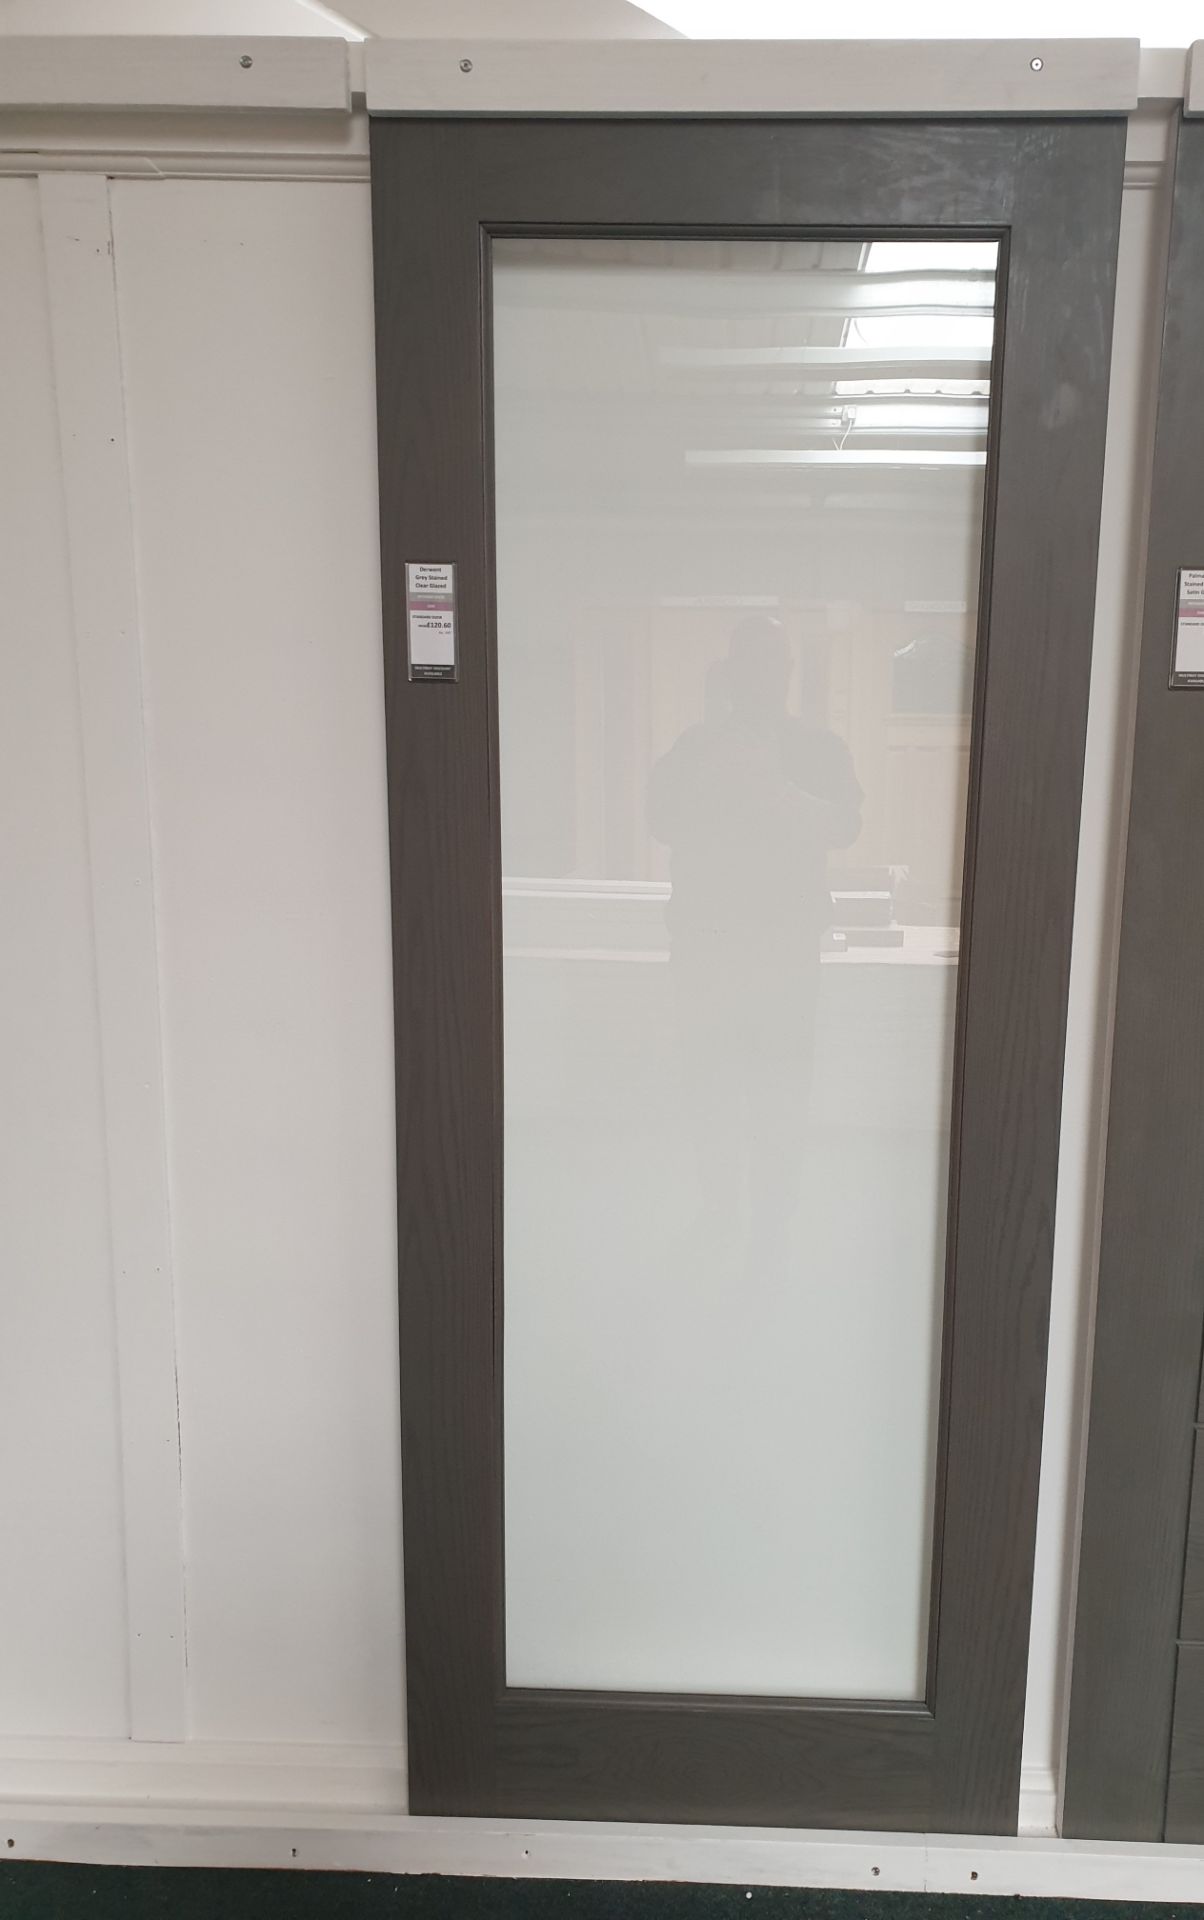 5 x Derwent Clear Glazed Grey UP 005 Internal Door 1981x686x35mm - Lots to be handed out in order